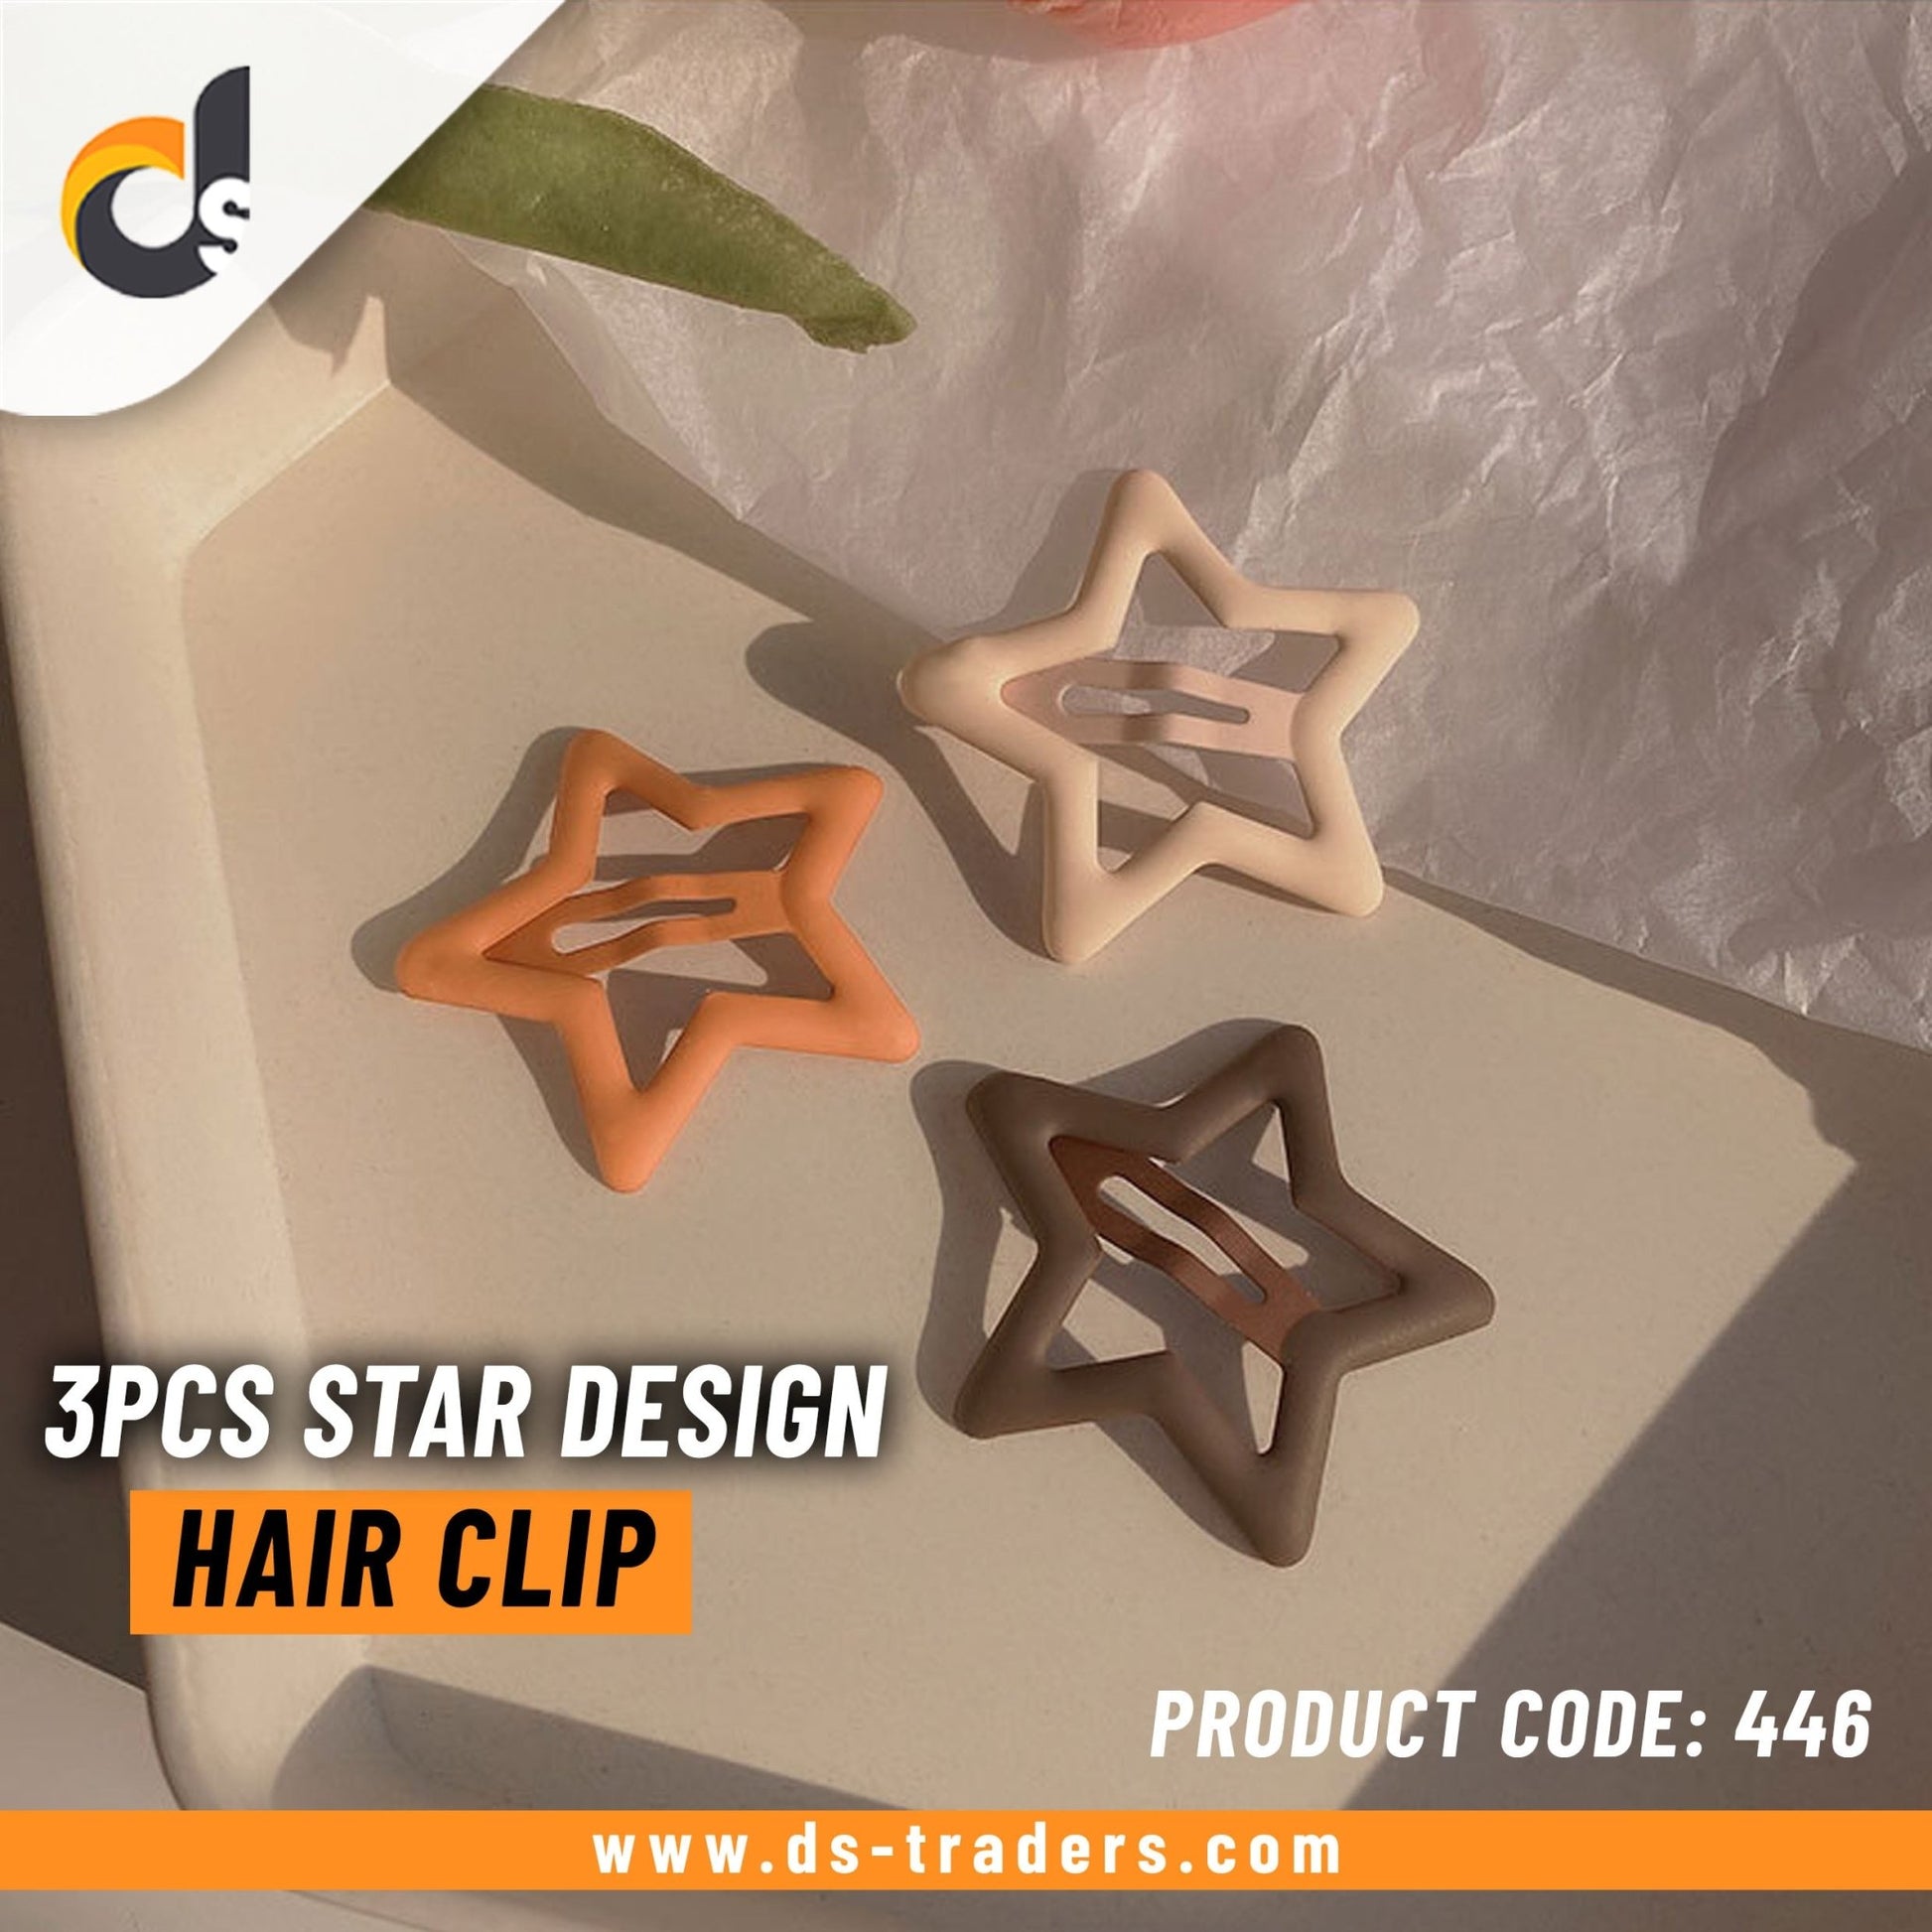 3Pcs Star Design Hair Clip - DS Traders